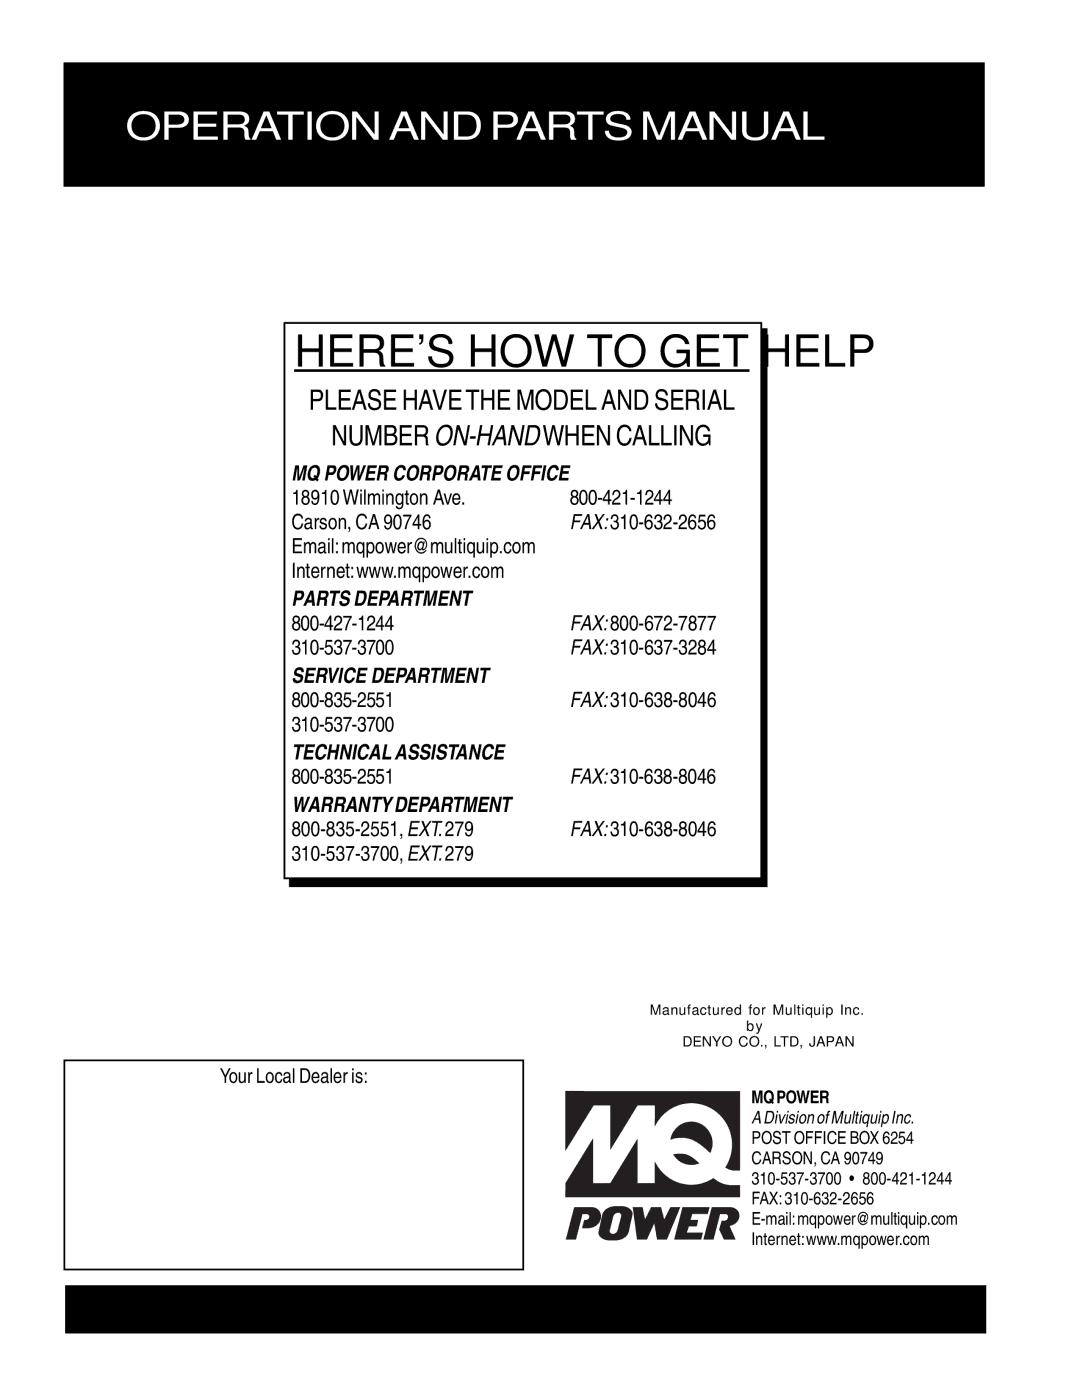 Multiquip DCA-400SSV operation manual Your Local Dealer is 